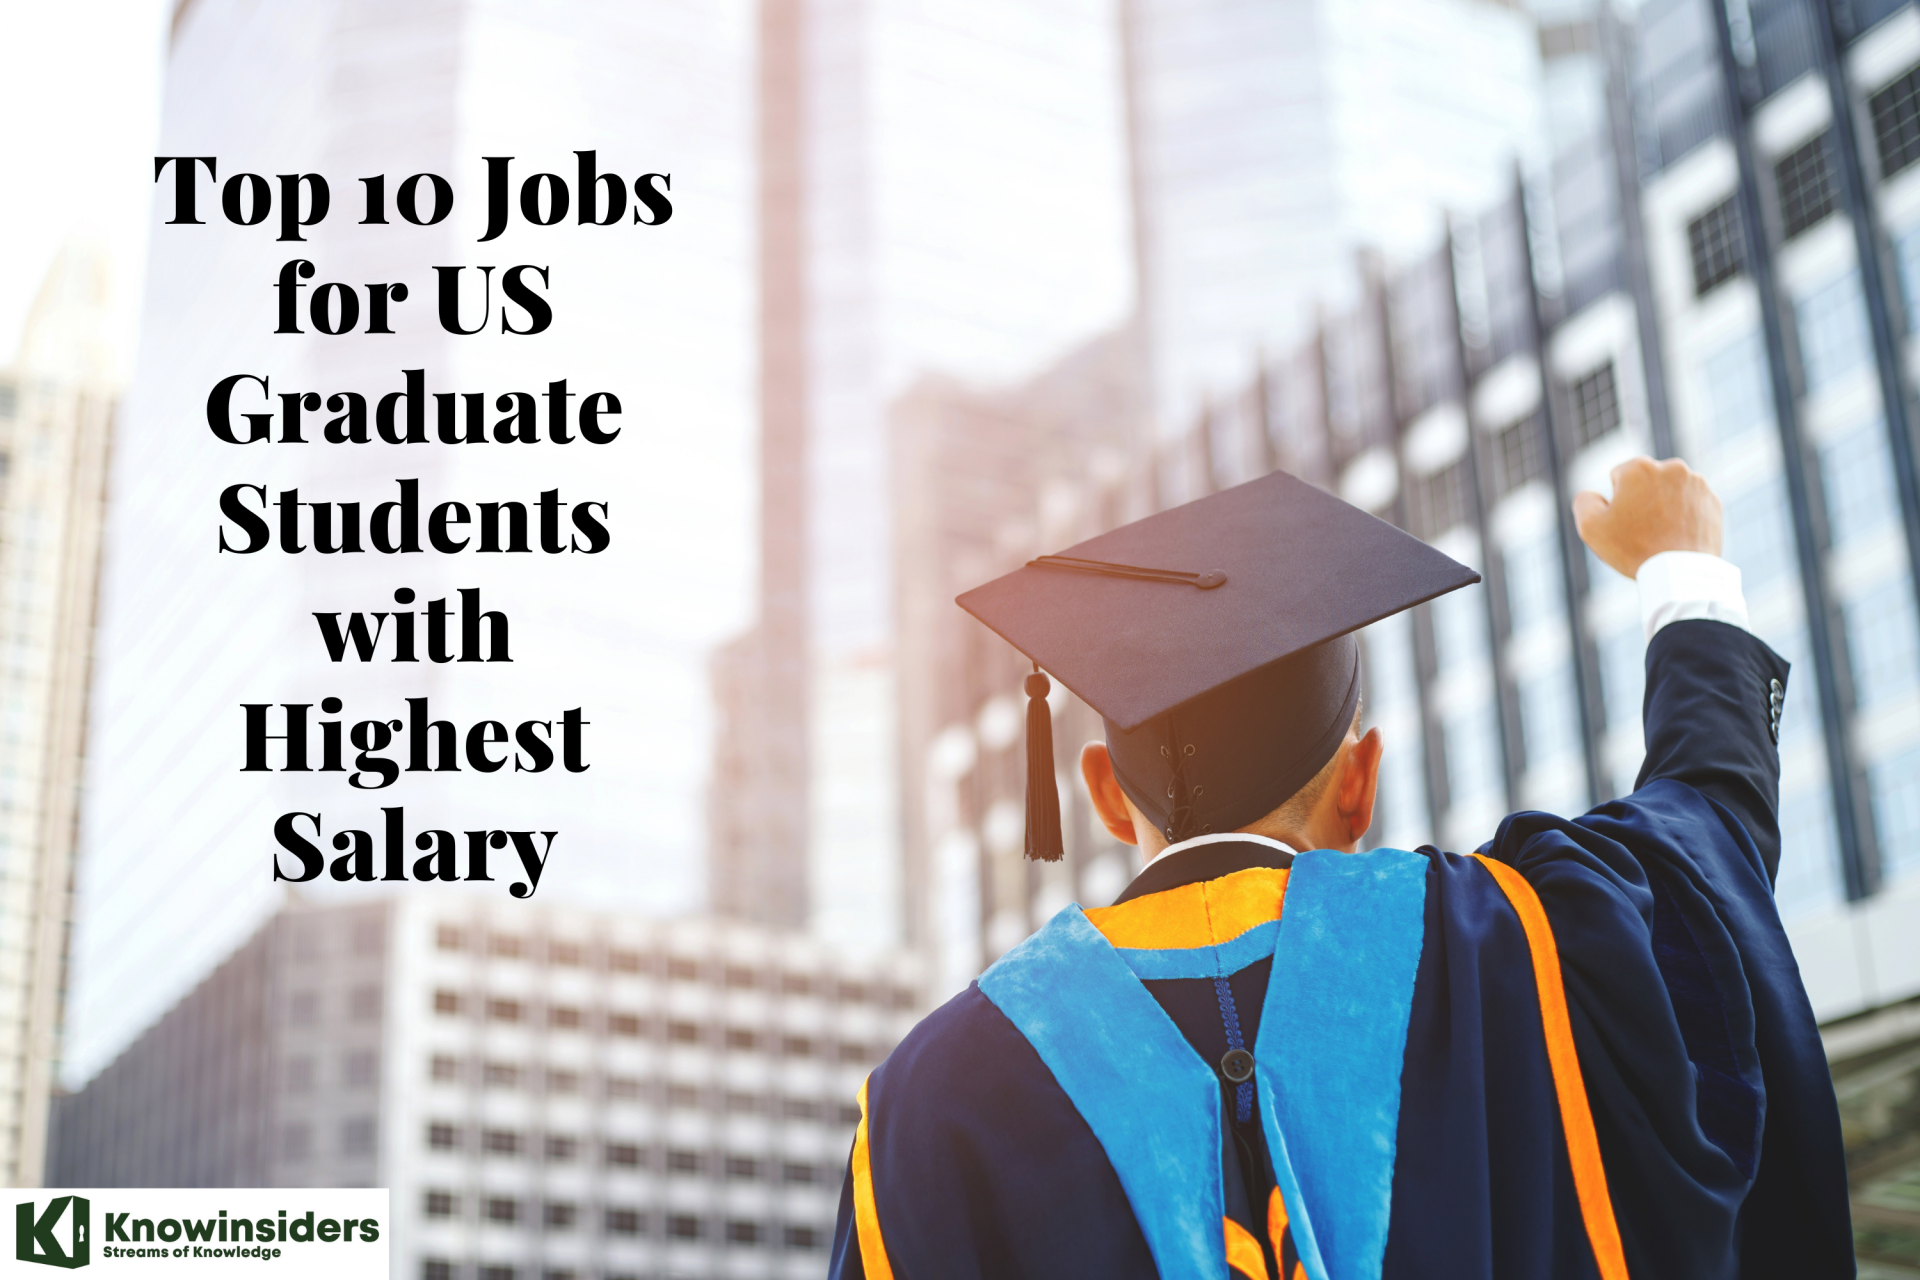 Top 10 Jobs for US Graduate Students with Highest Salary - $100,000 Per Year